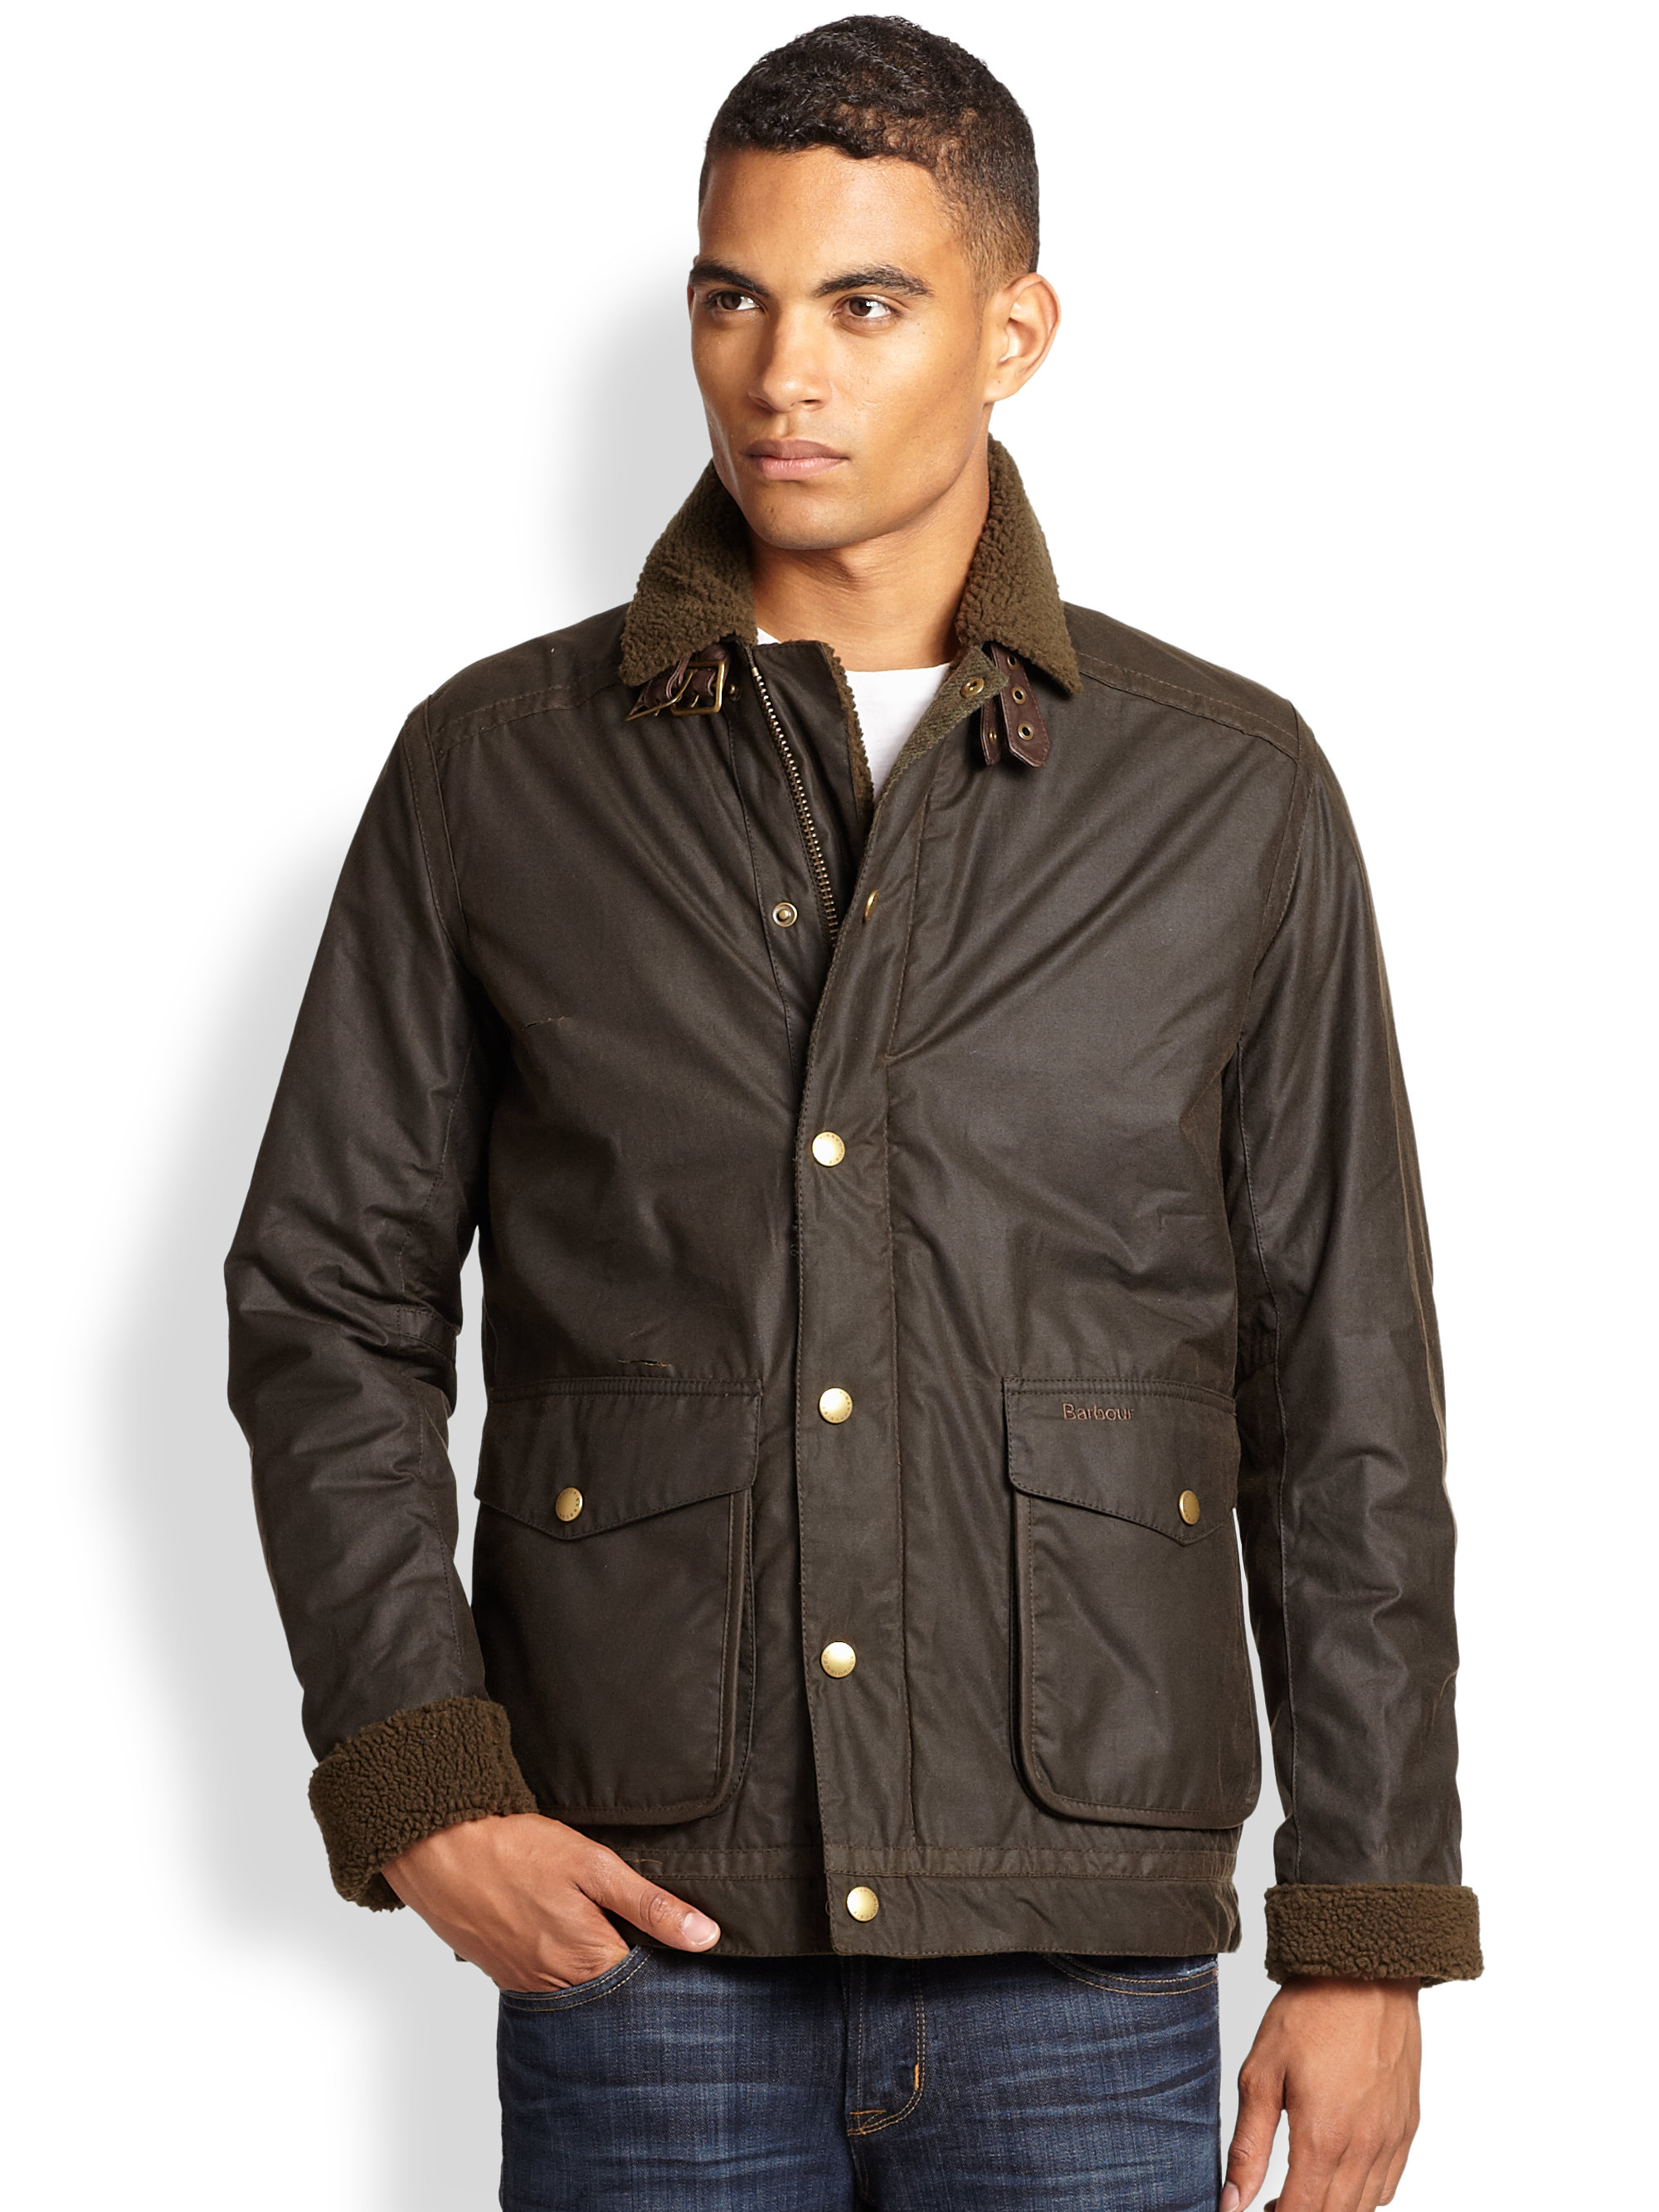 Lyst - Barbour Catrick Waxed Cotton Jacket in Brown for Men